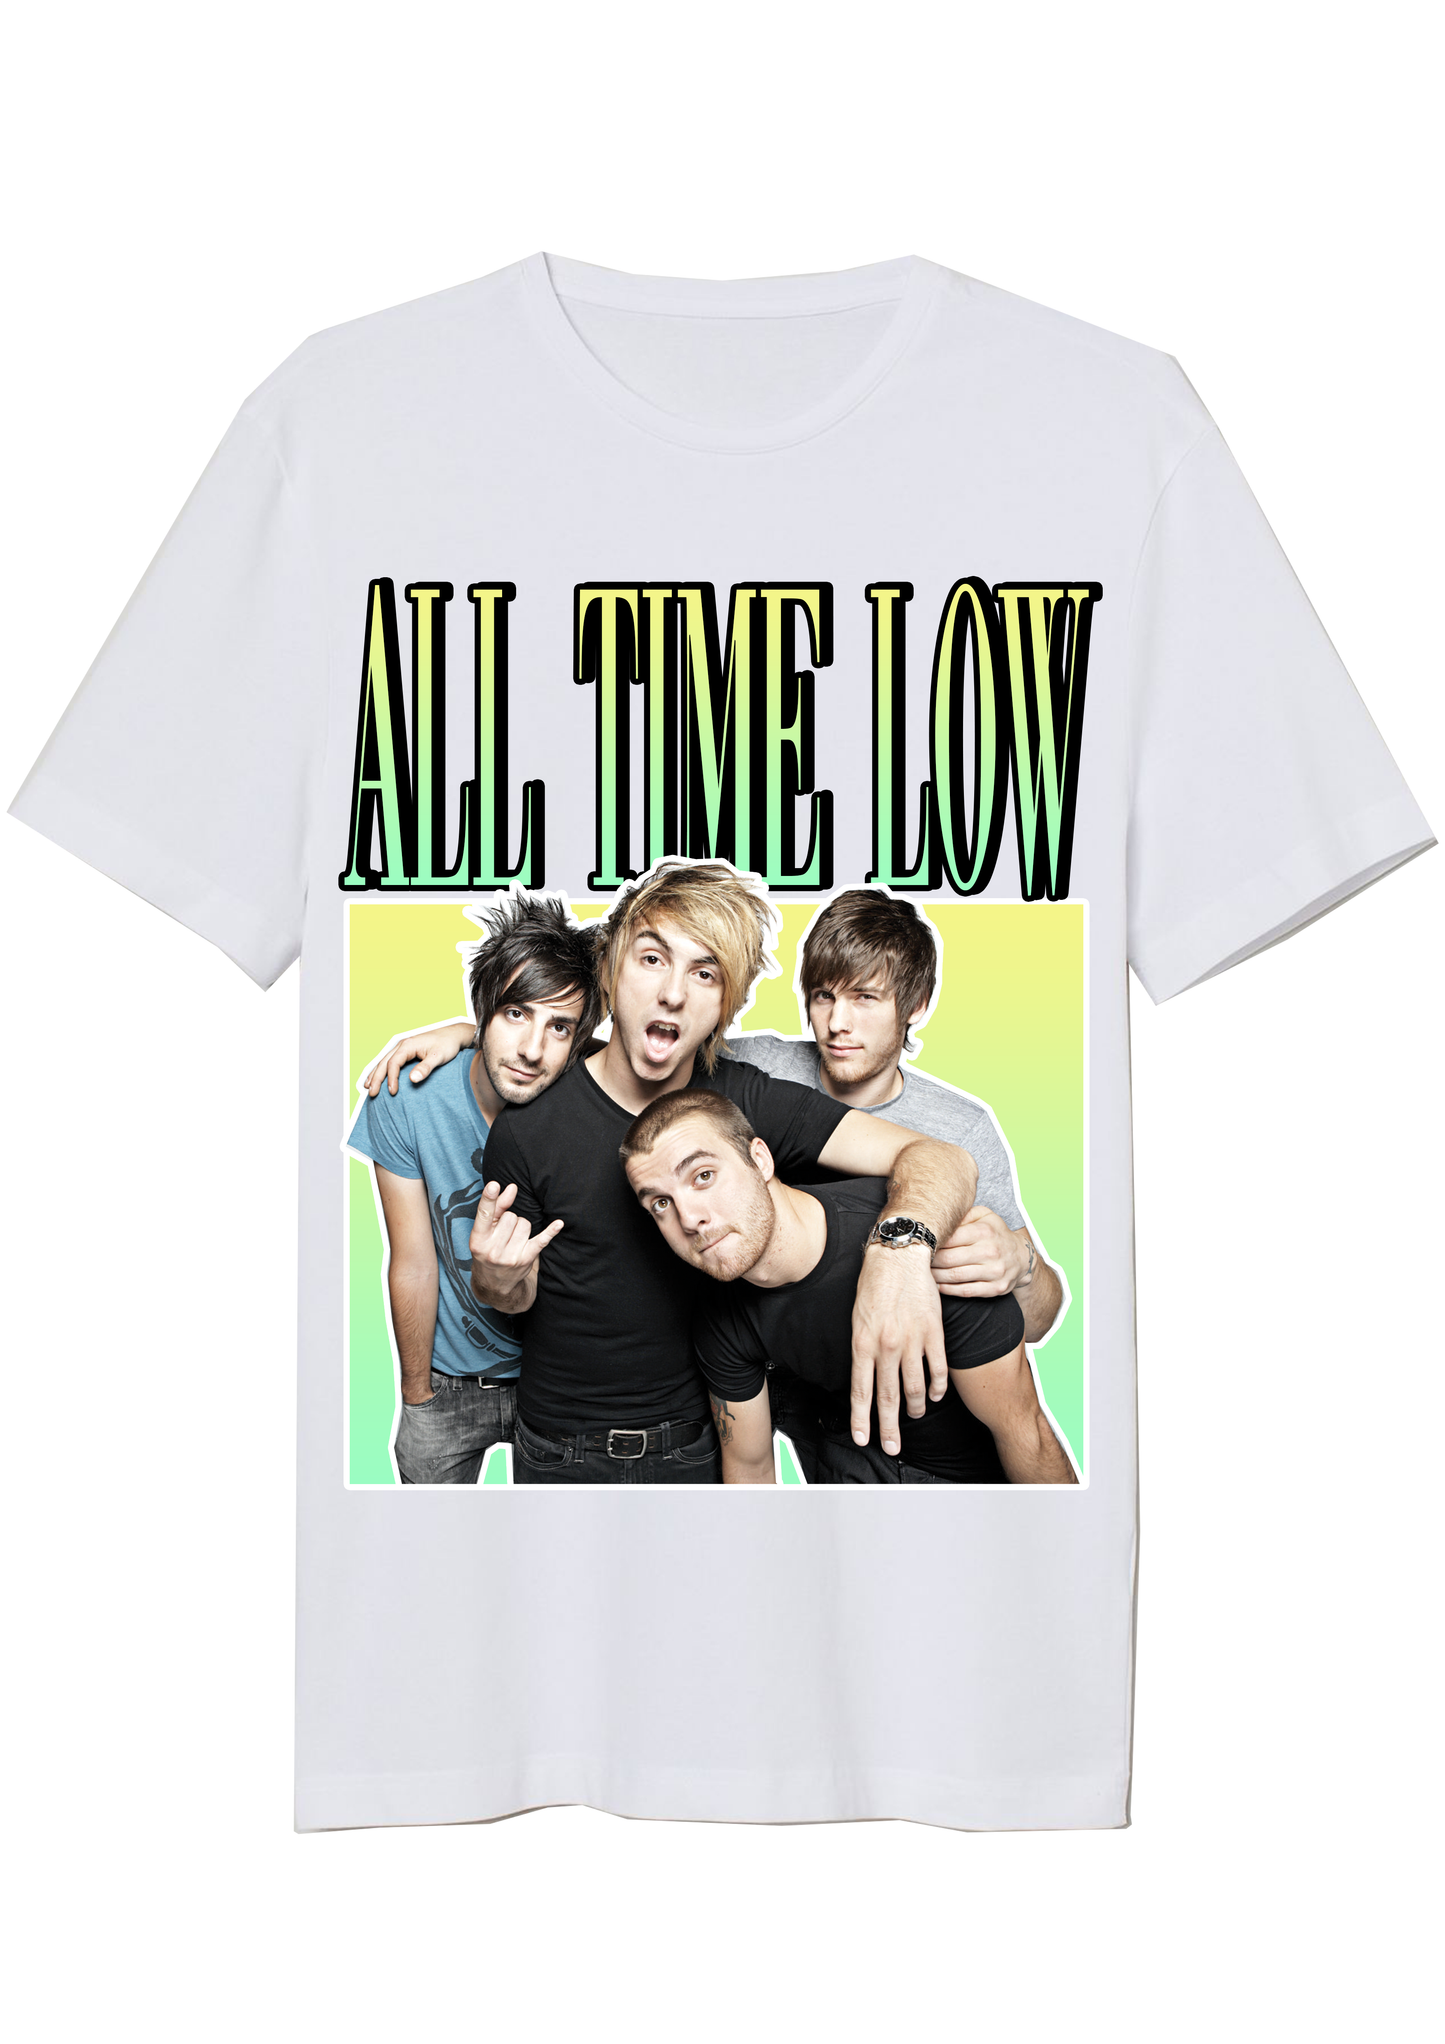 All Time Low Vintage T-Shirt